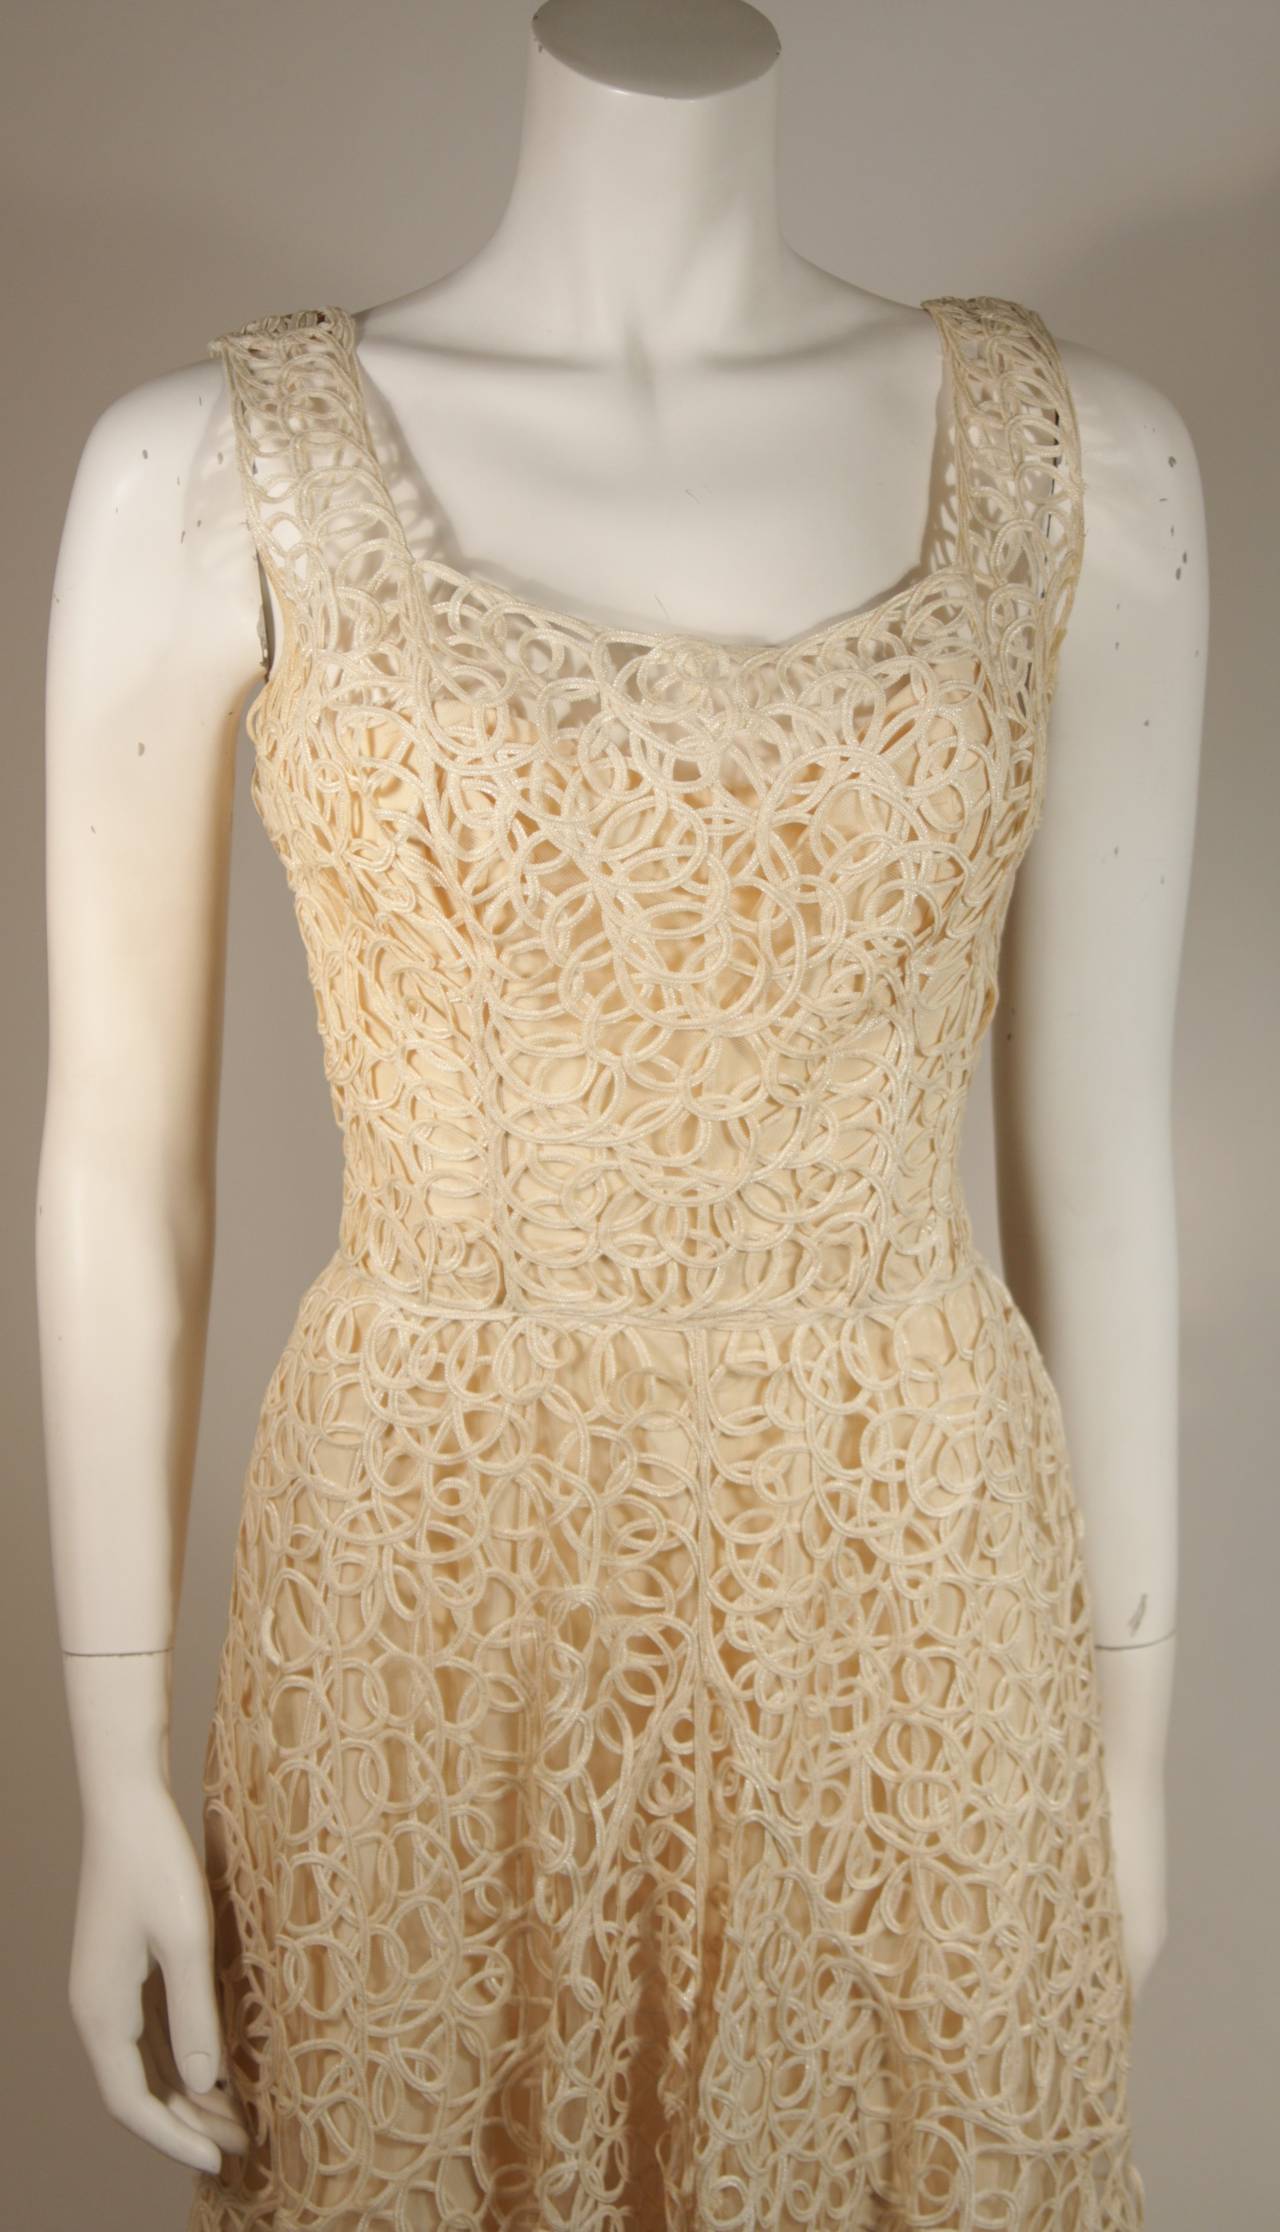 Ceil Chapman Cream Lattice Work Lace Cocktail Dress Size Small In Excellent Condition For Sale In Los Angeles, CA